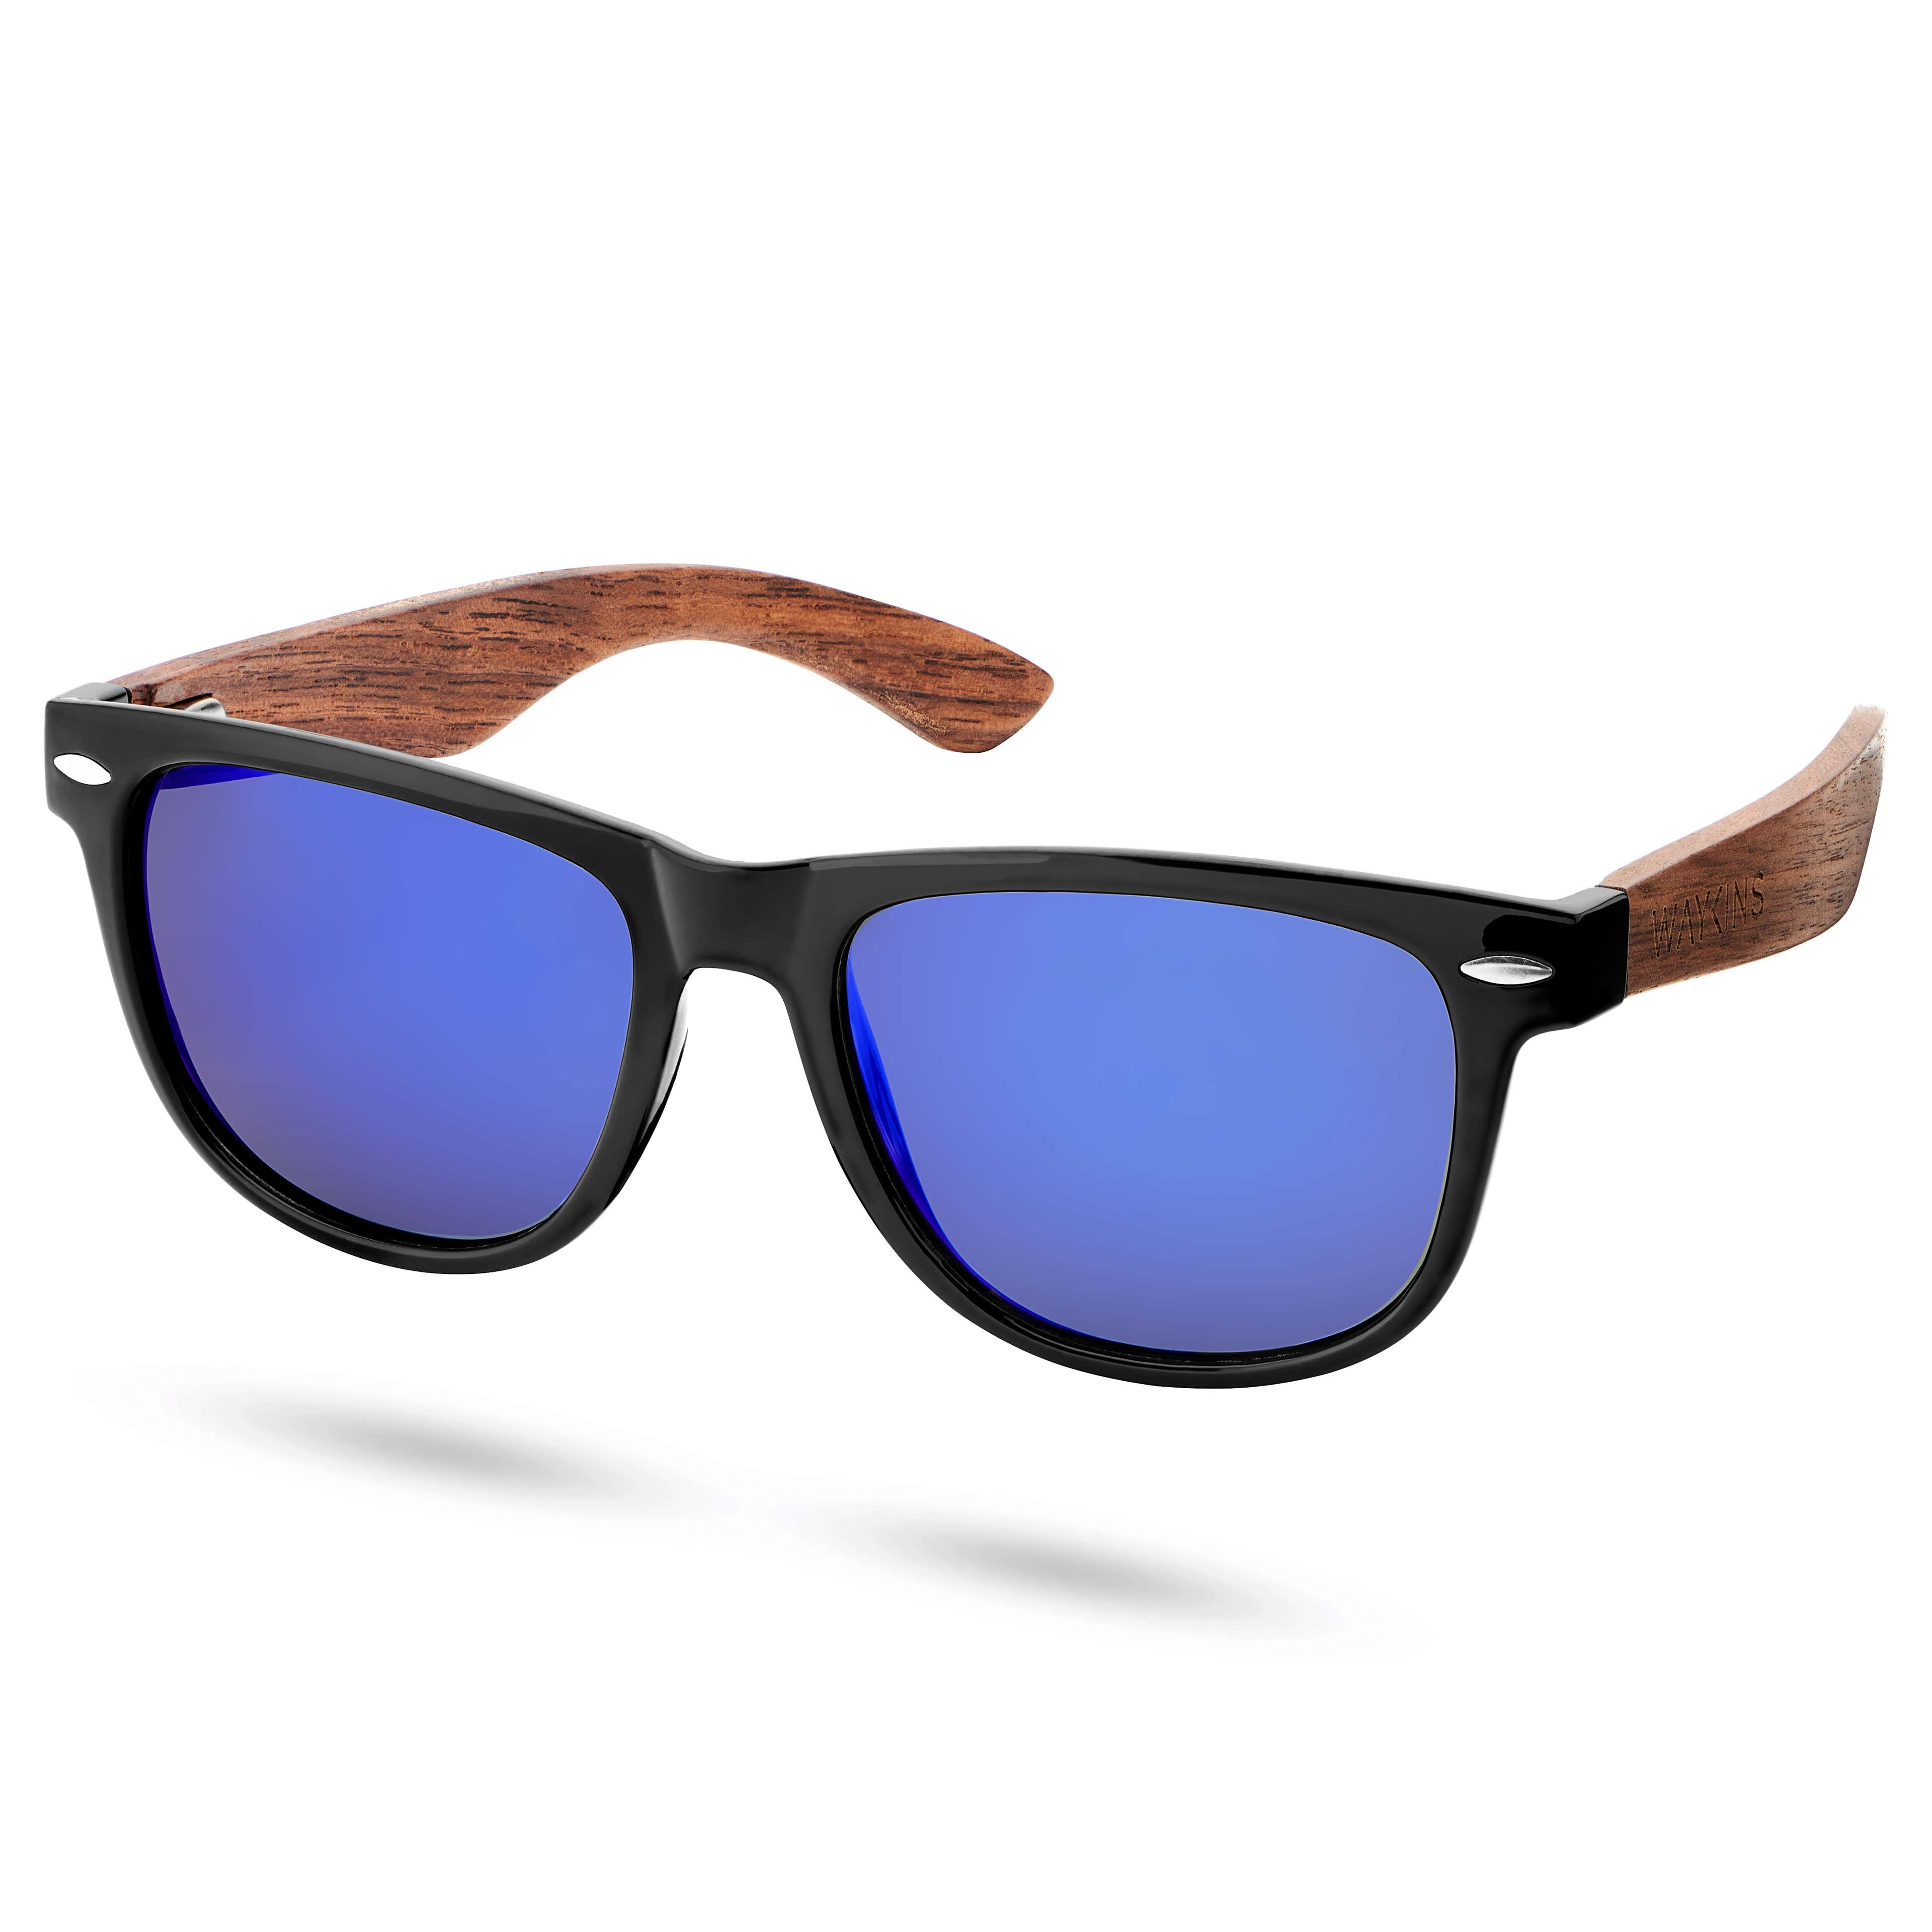 Black & Blue Retro Polarised Sunglasses With Wood Temples - 1 - primary thumbnail small_image gallery